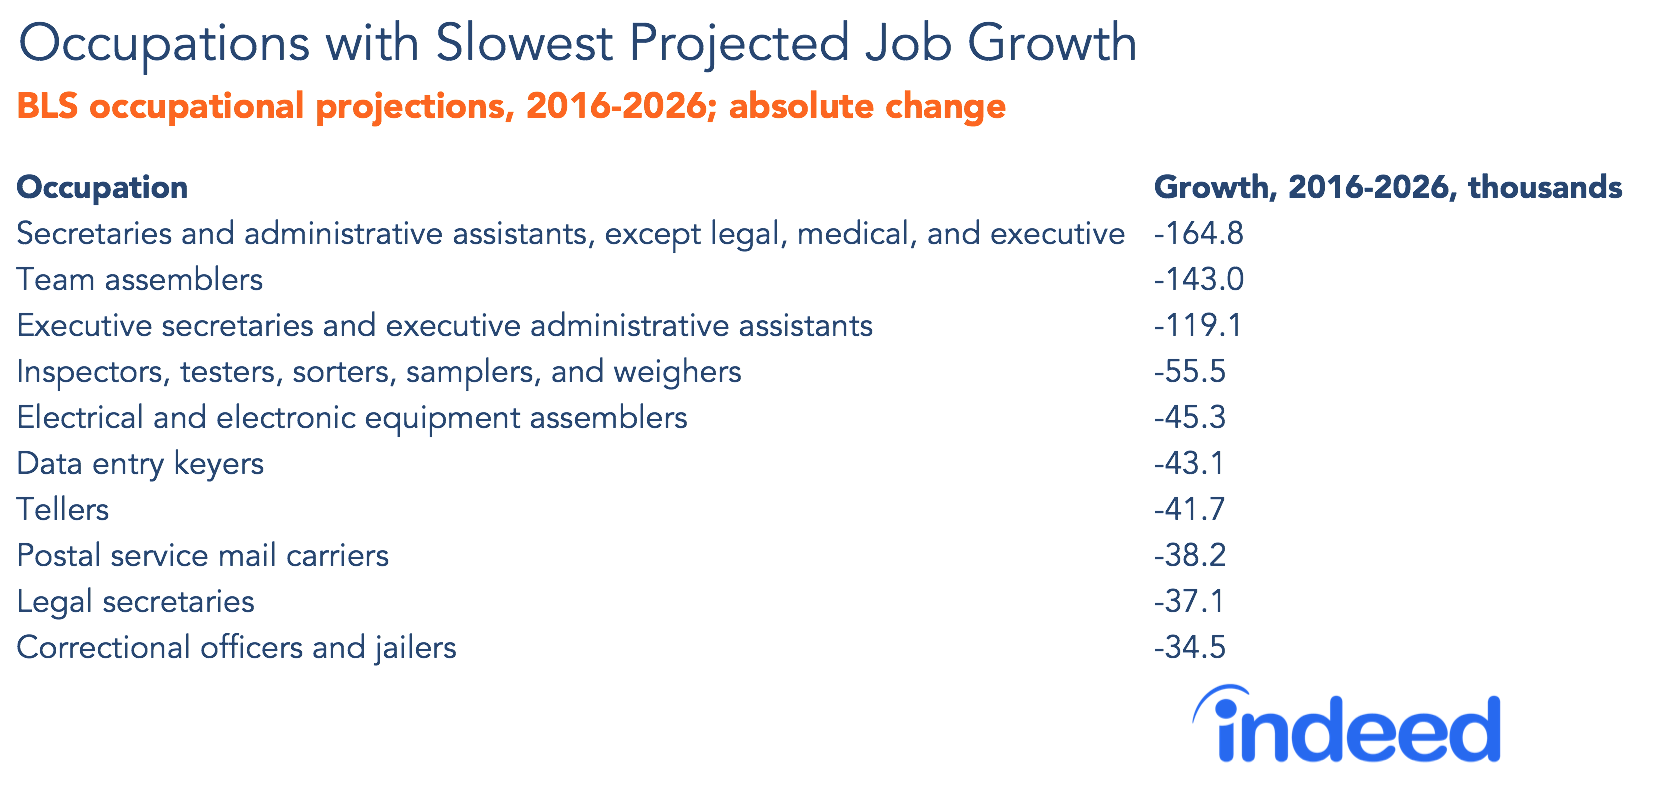 Occupations with slowest projected job growth